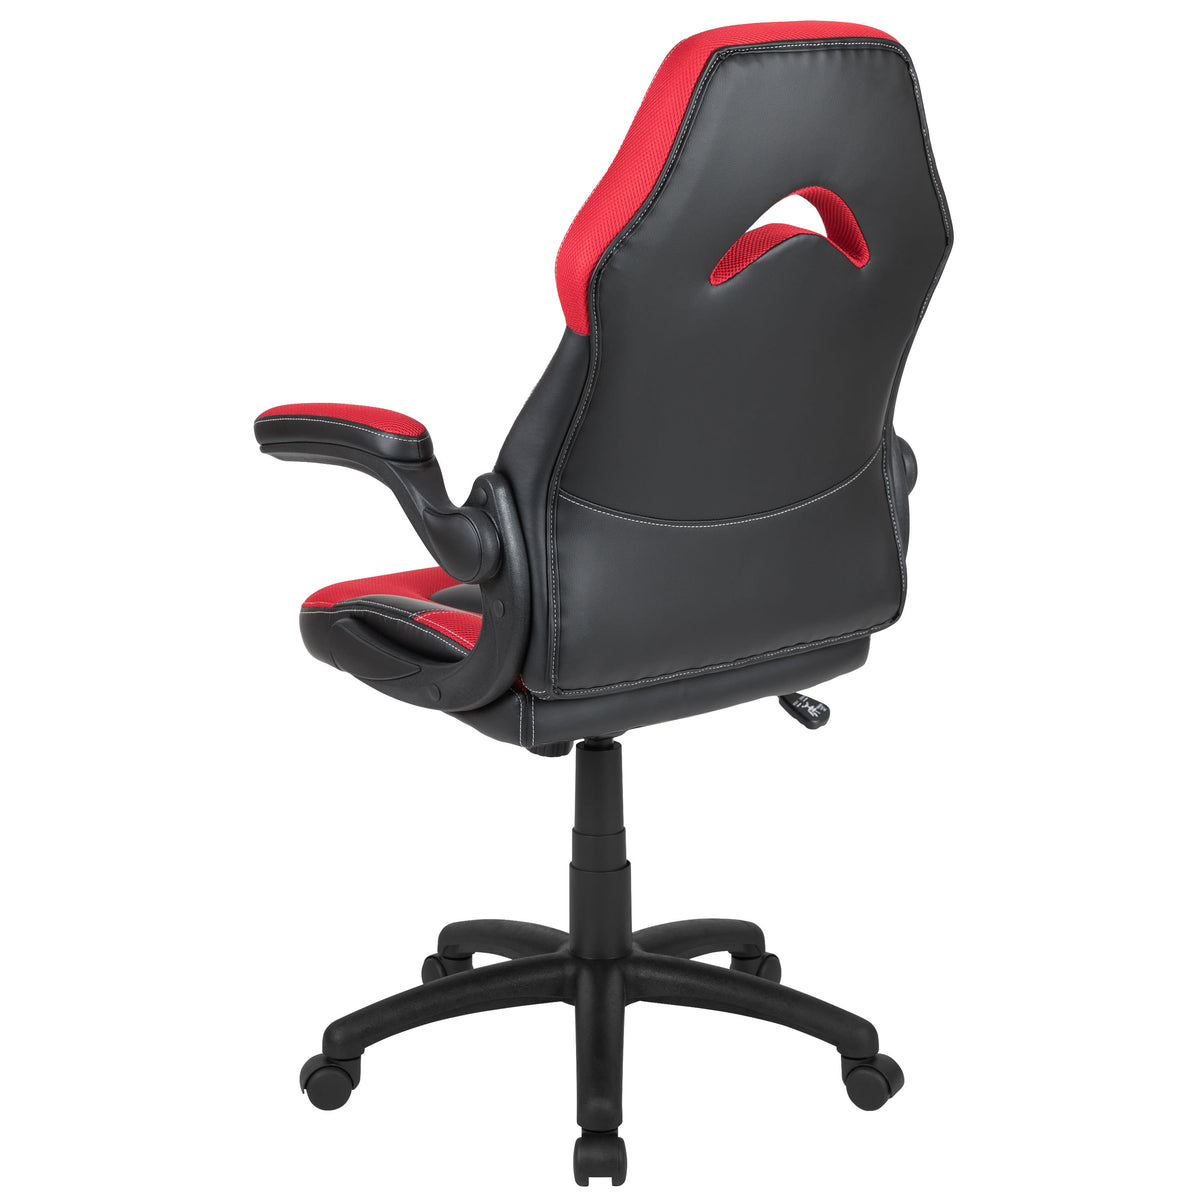 Red |#| Ergonomic Red and Black Computer Gaming Chair with Padded Flip-Up Arms